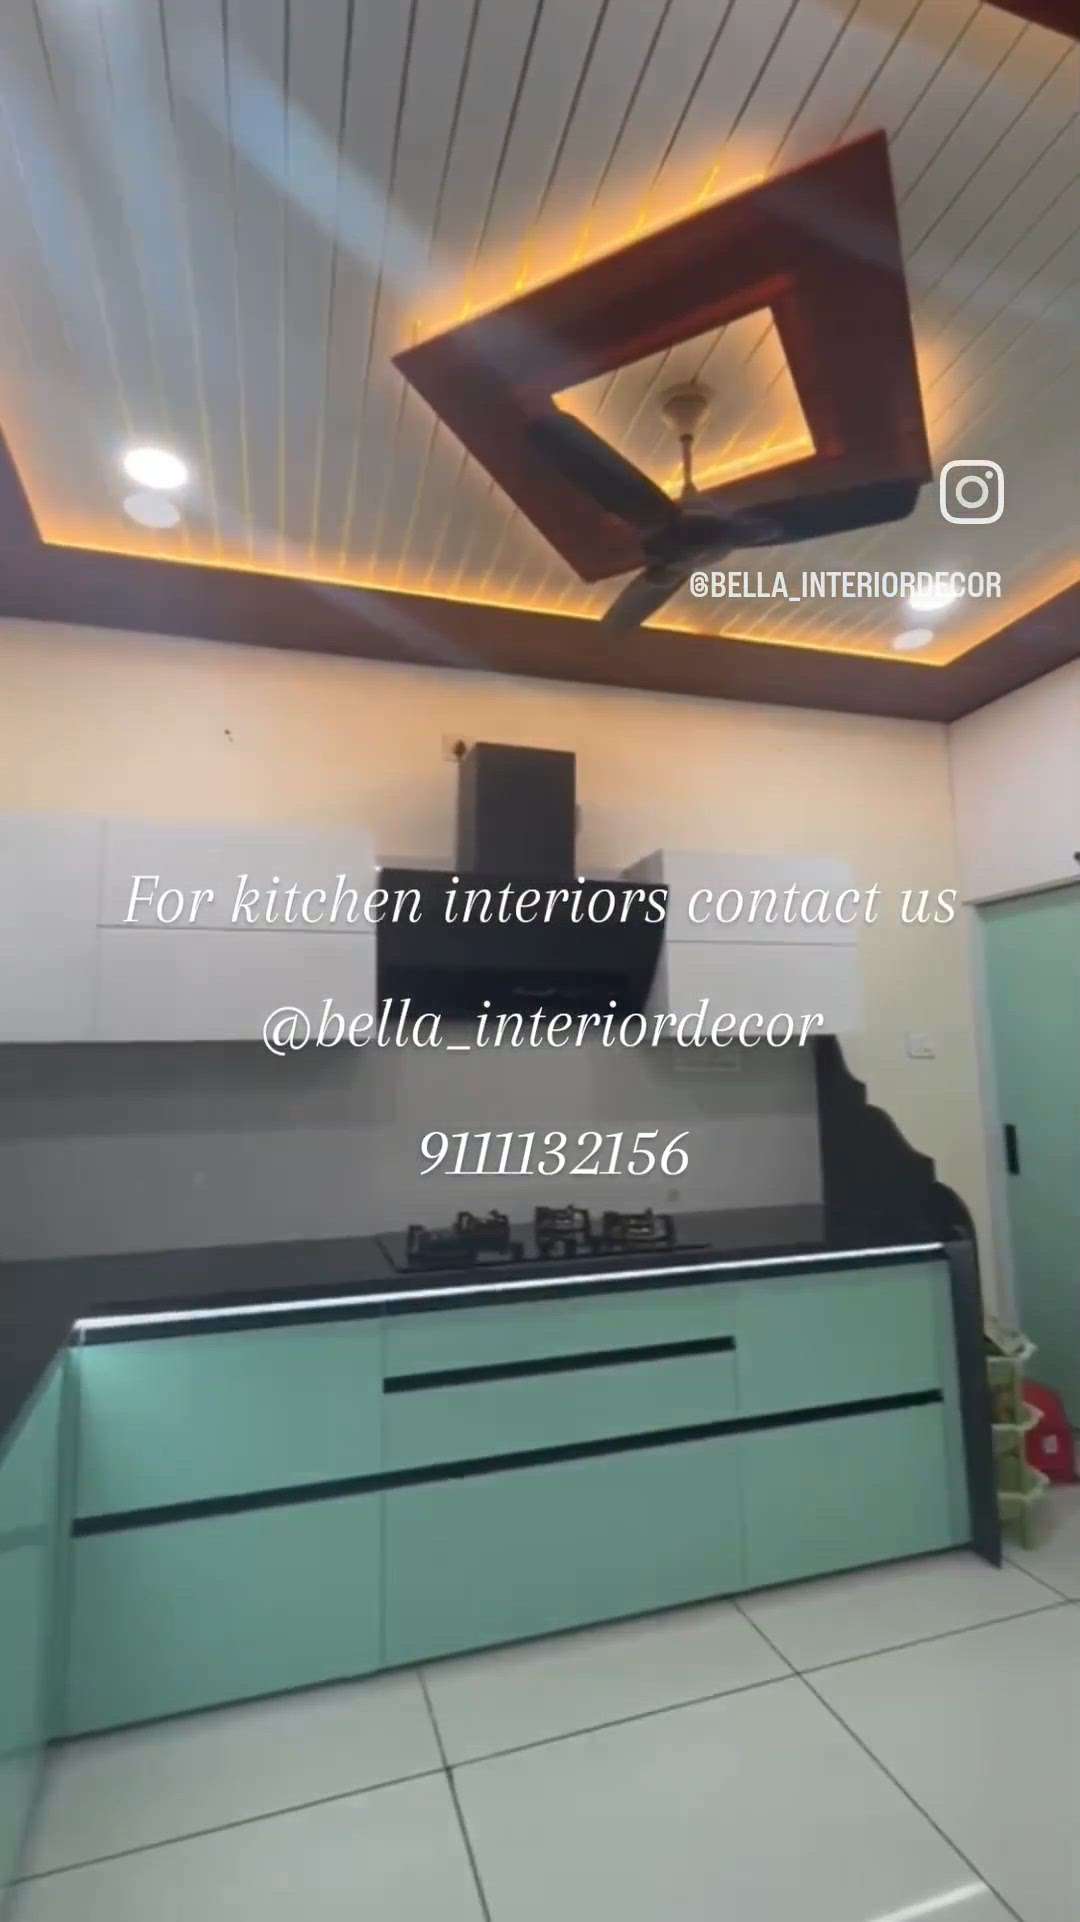 For house interiors contact

BELLA INTERIOR DECOR 
.
.
Make Your Dream House Come True With @bella_interiordecor 
.
.
• Your Budget ~ Their Brain 
• Themed Based Work
• BedRooms, Living Rooms, Study, Kitchen, Offices, Showrooms & More! 
.
.
Contact - 9111132156
.
Address :- jangirwala square Indore m.p. 


#interiordesign #design #interior #homedecor
#architecture #home #decor #interiors
#homedesign #interiordesigner #furniture
 #designer #interiorstyling
#interiordecor #homesweethome 
#furnituredesign #livingroom #interiordecorating  #instagood #instagram
#kitchendesign #foryou #photographylover #explorepage✨ #explorepage #viralpost #trending #trends #reelsinstagram #exploremore   #kolopost   #koloapp  #koloviral  #koloindore  #InteriorDesigner  #indorehouse   #LUXURY_INTERIOR   #luxurysofa  #luxuryhomedecore